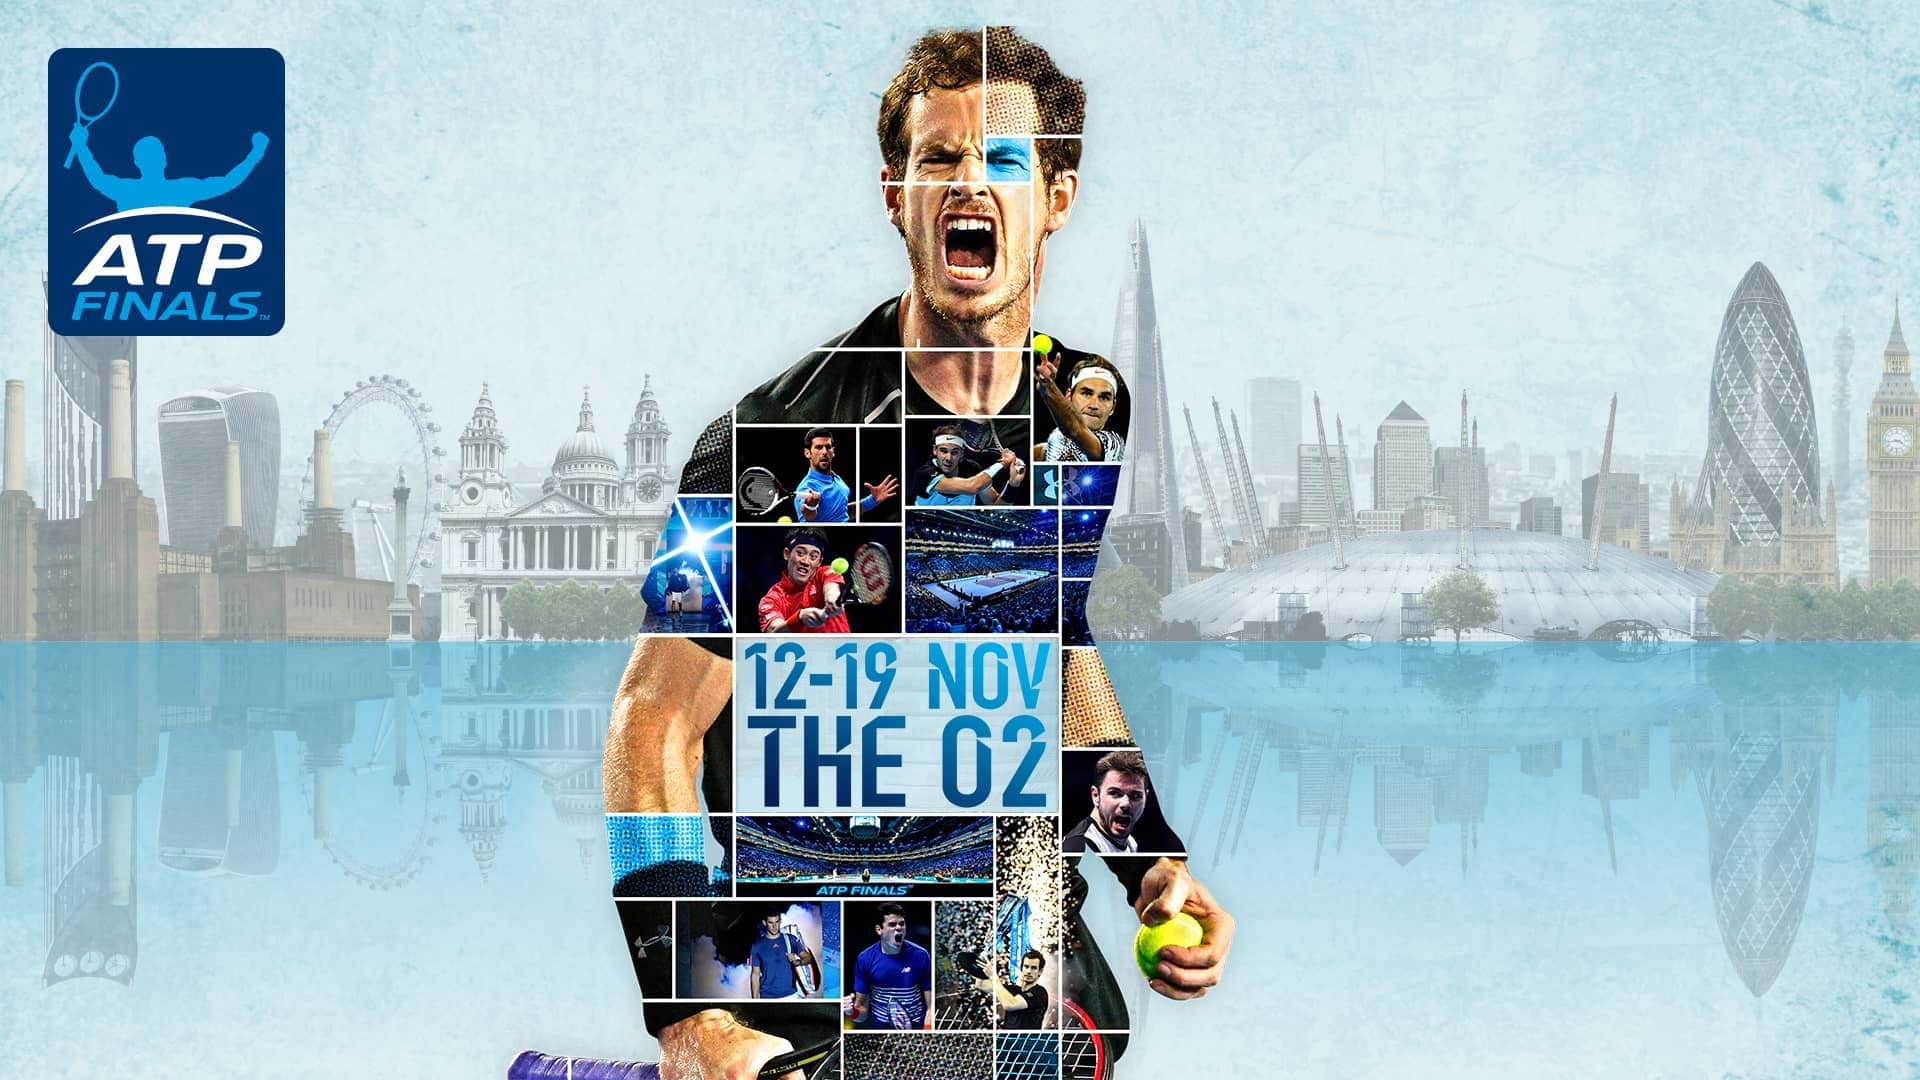 World No. 1 Andy Murray will be battling to qualify for the 2017 ATP Finals, to be held at The O2 in London from 12-19 November.